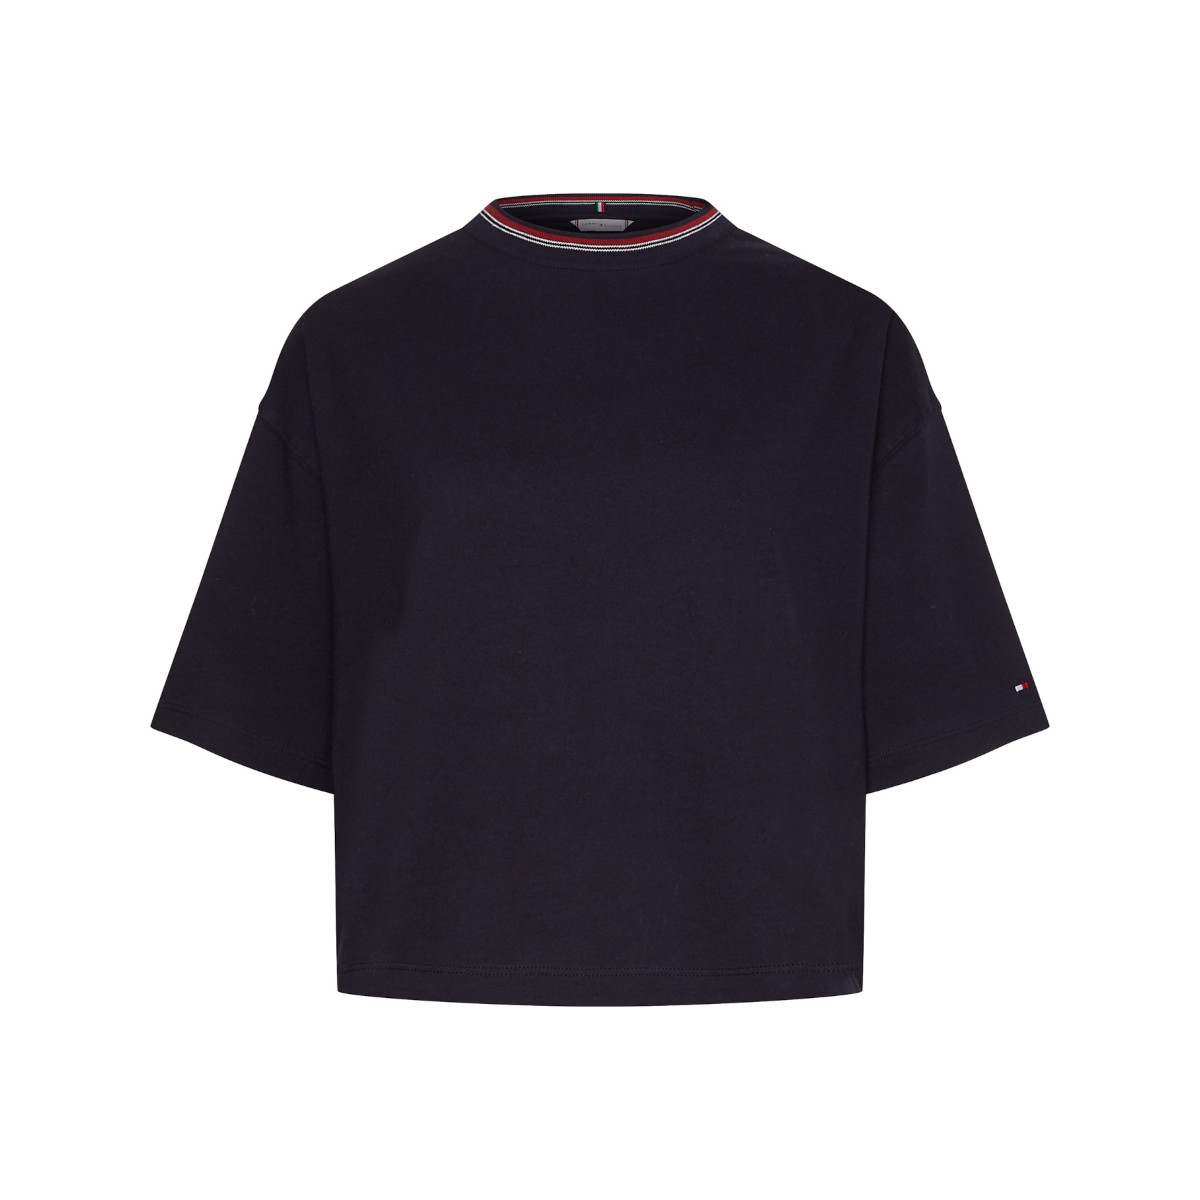 M02-WOMEN-OTHER KNIT TOPS